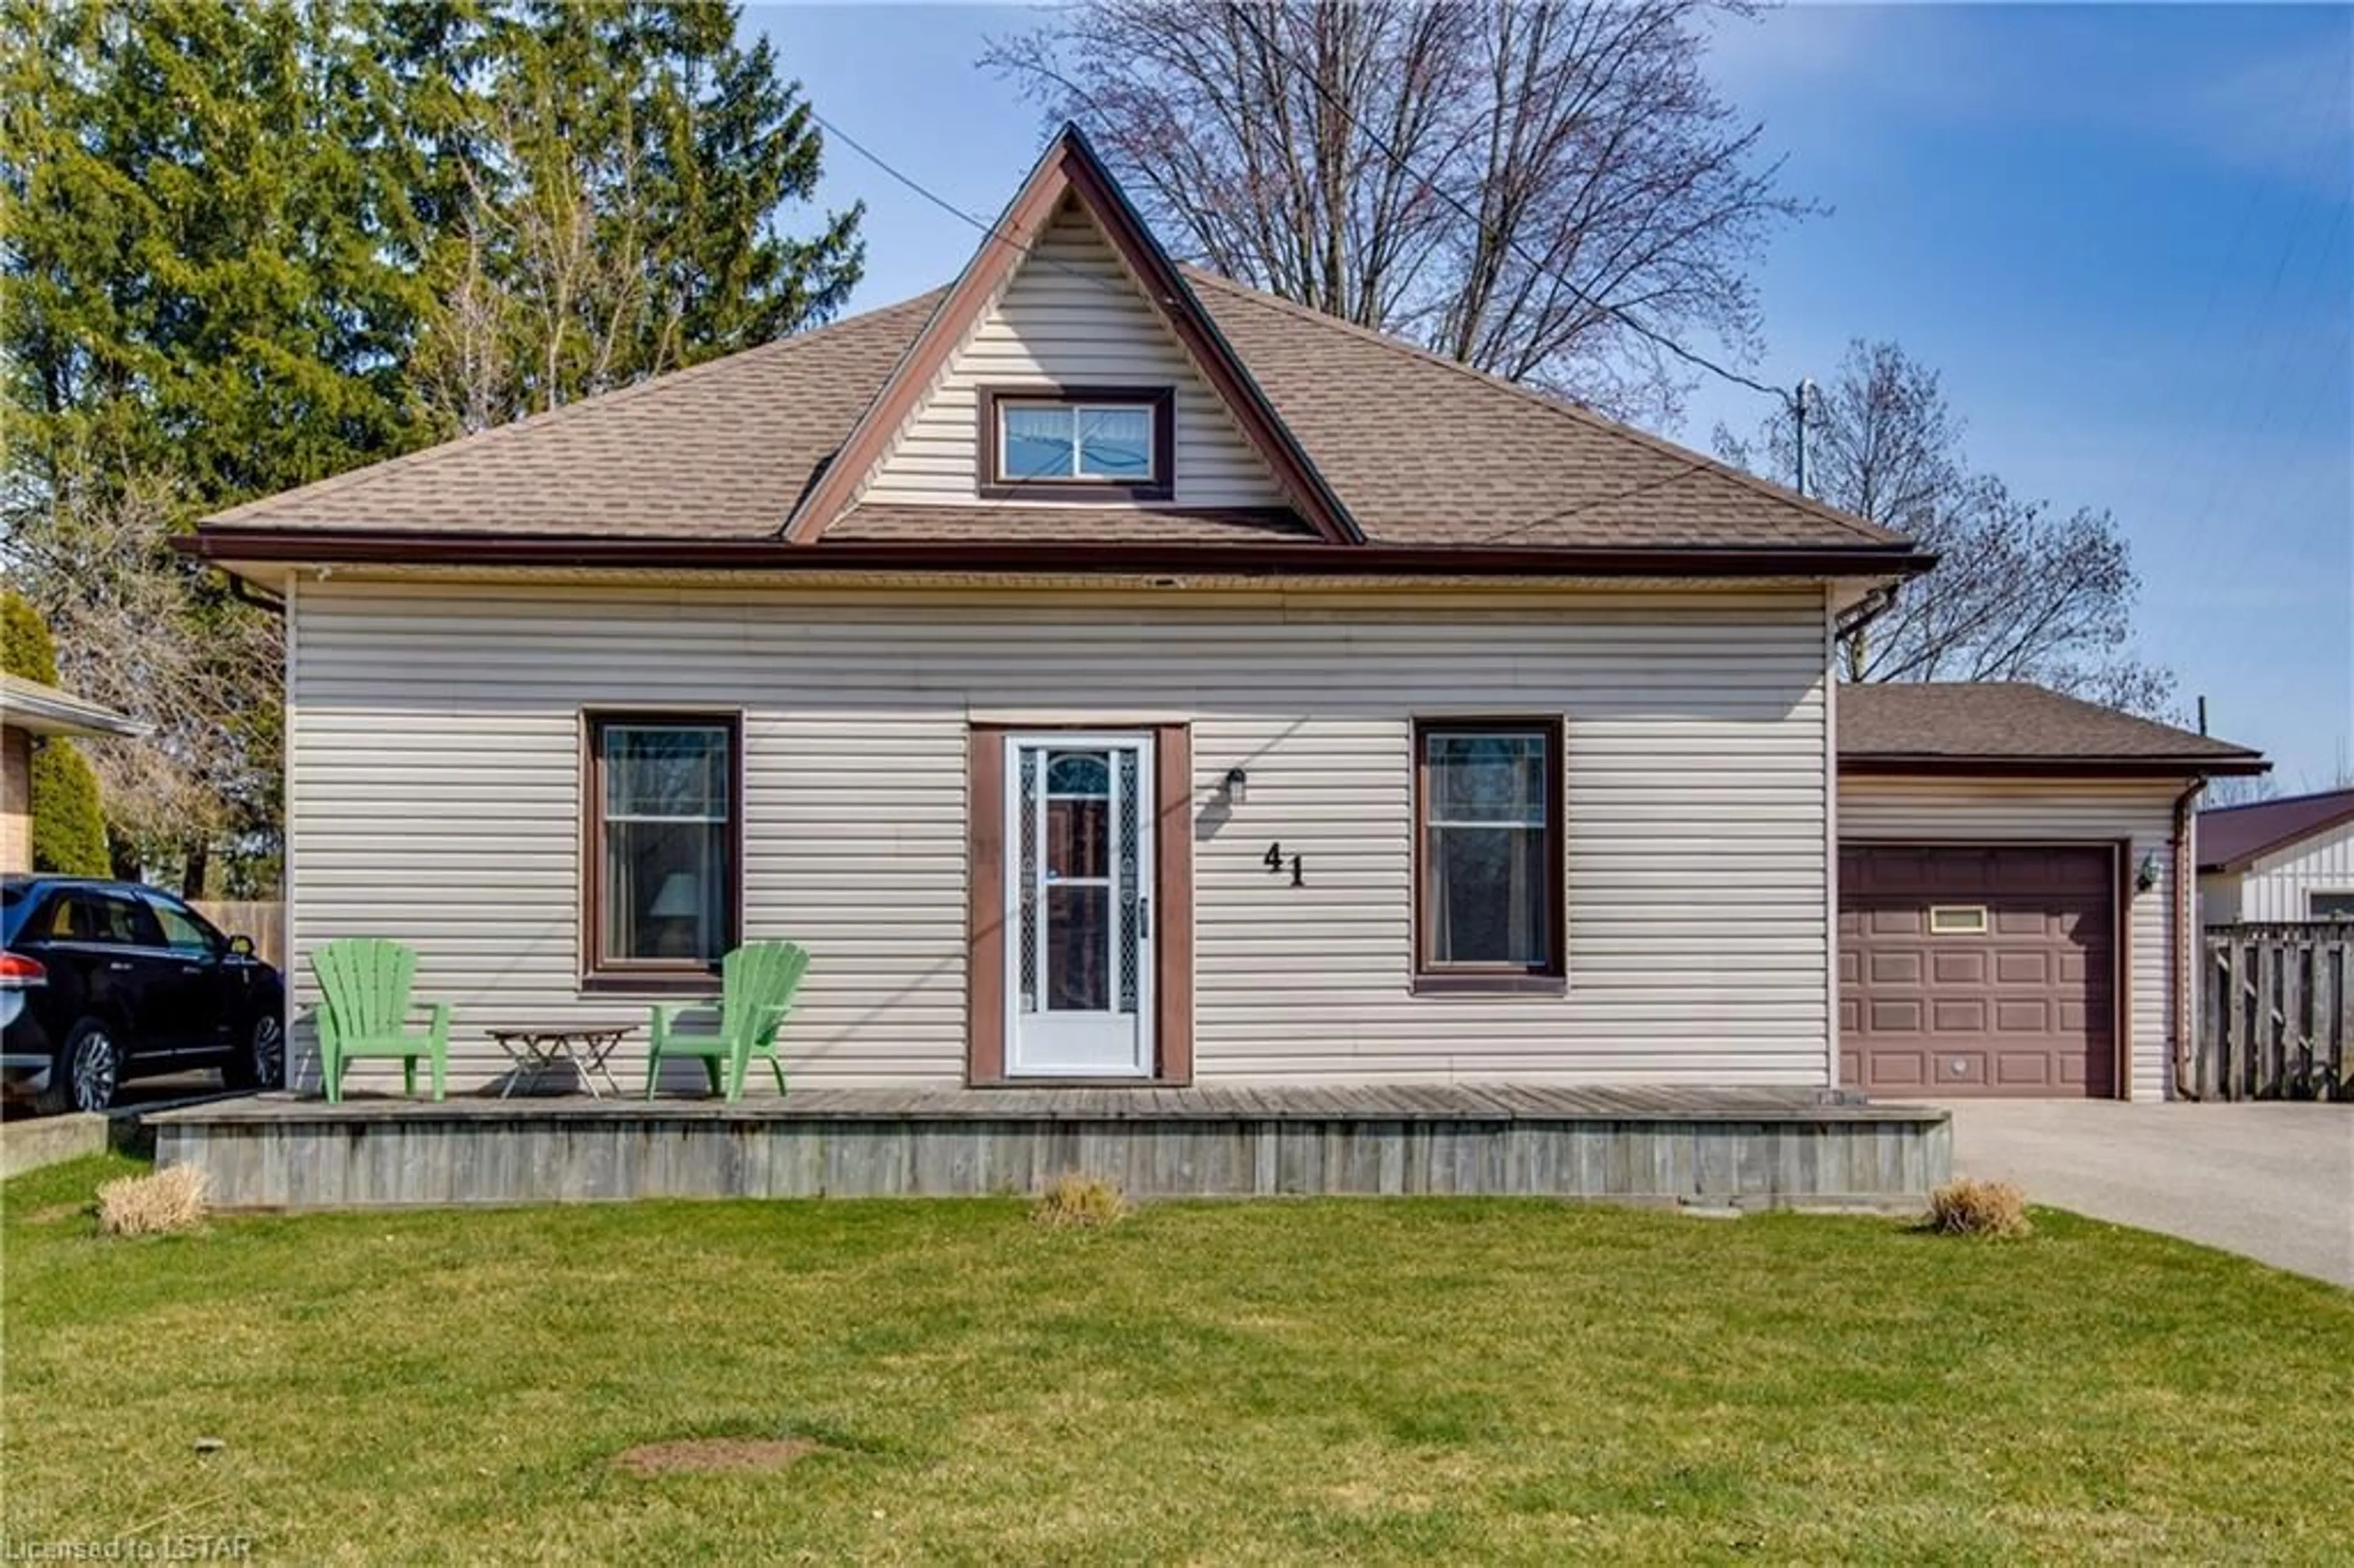 Cottage for 41 Queen St, Strathroy Ontario N7G 2H5